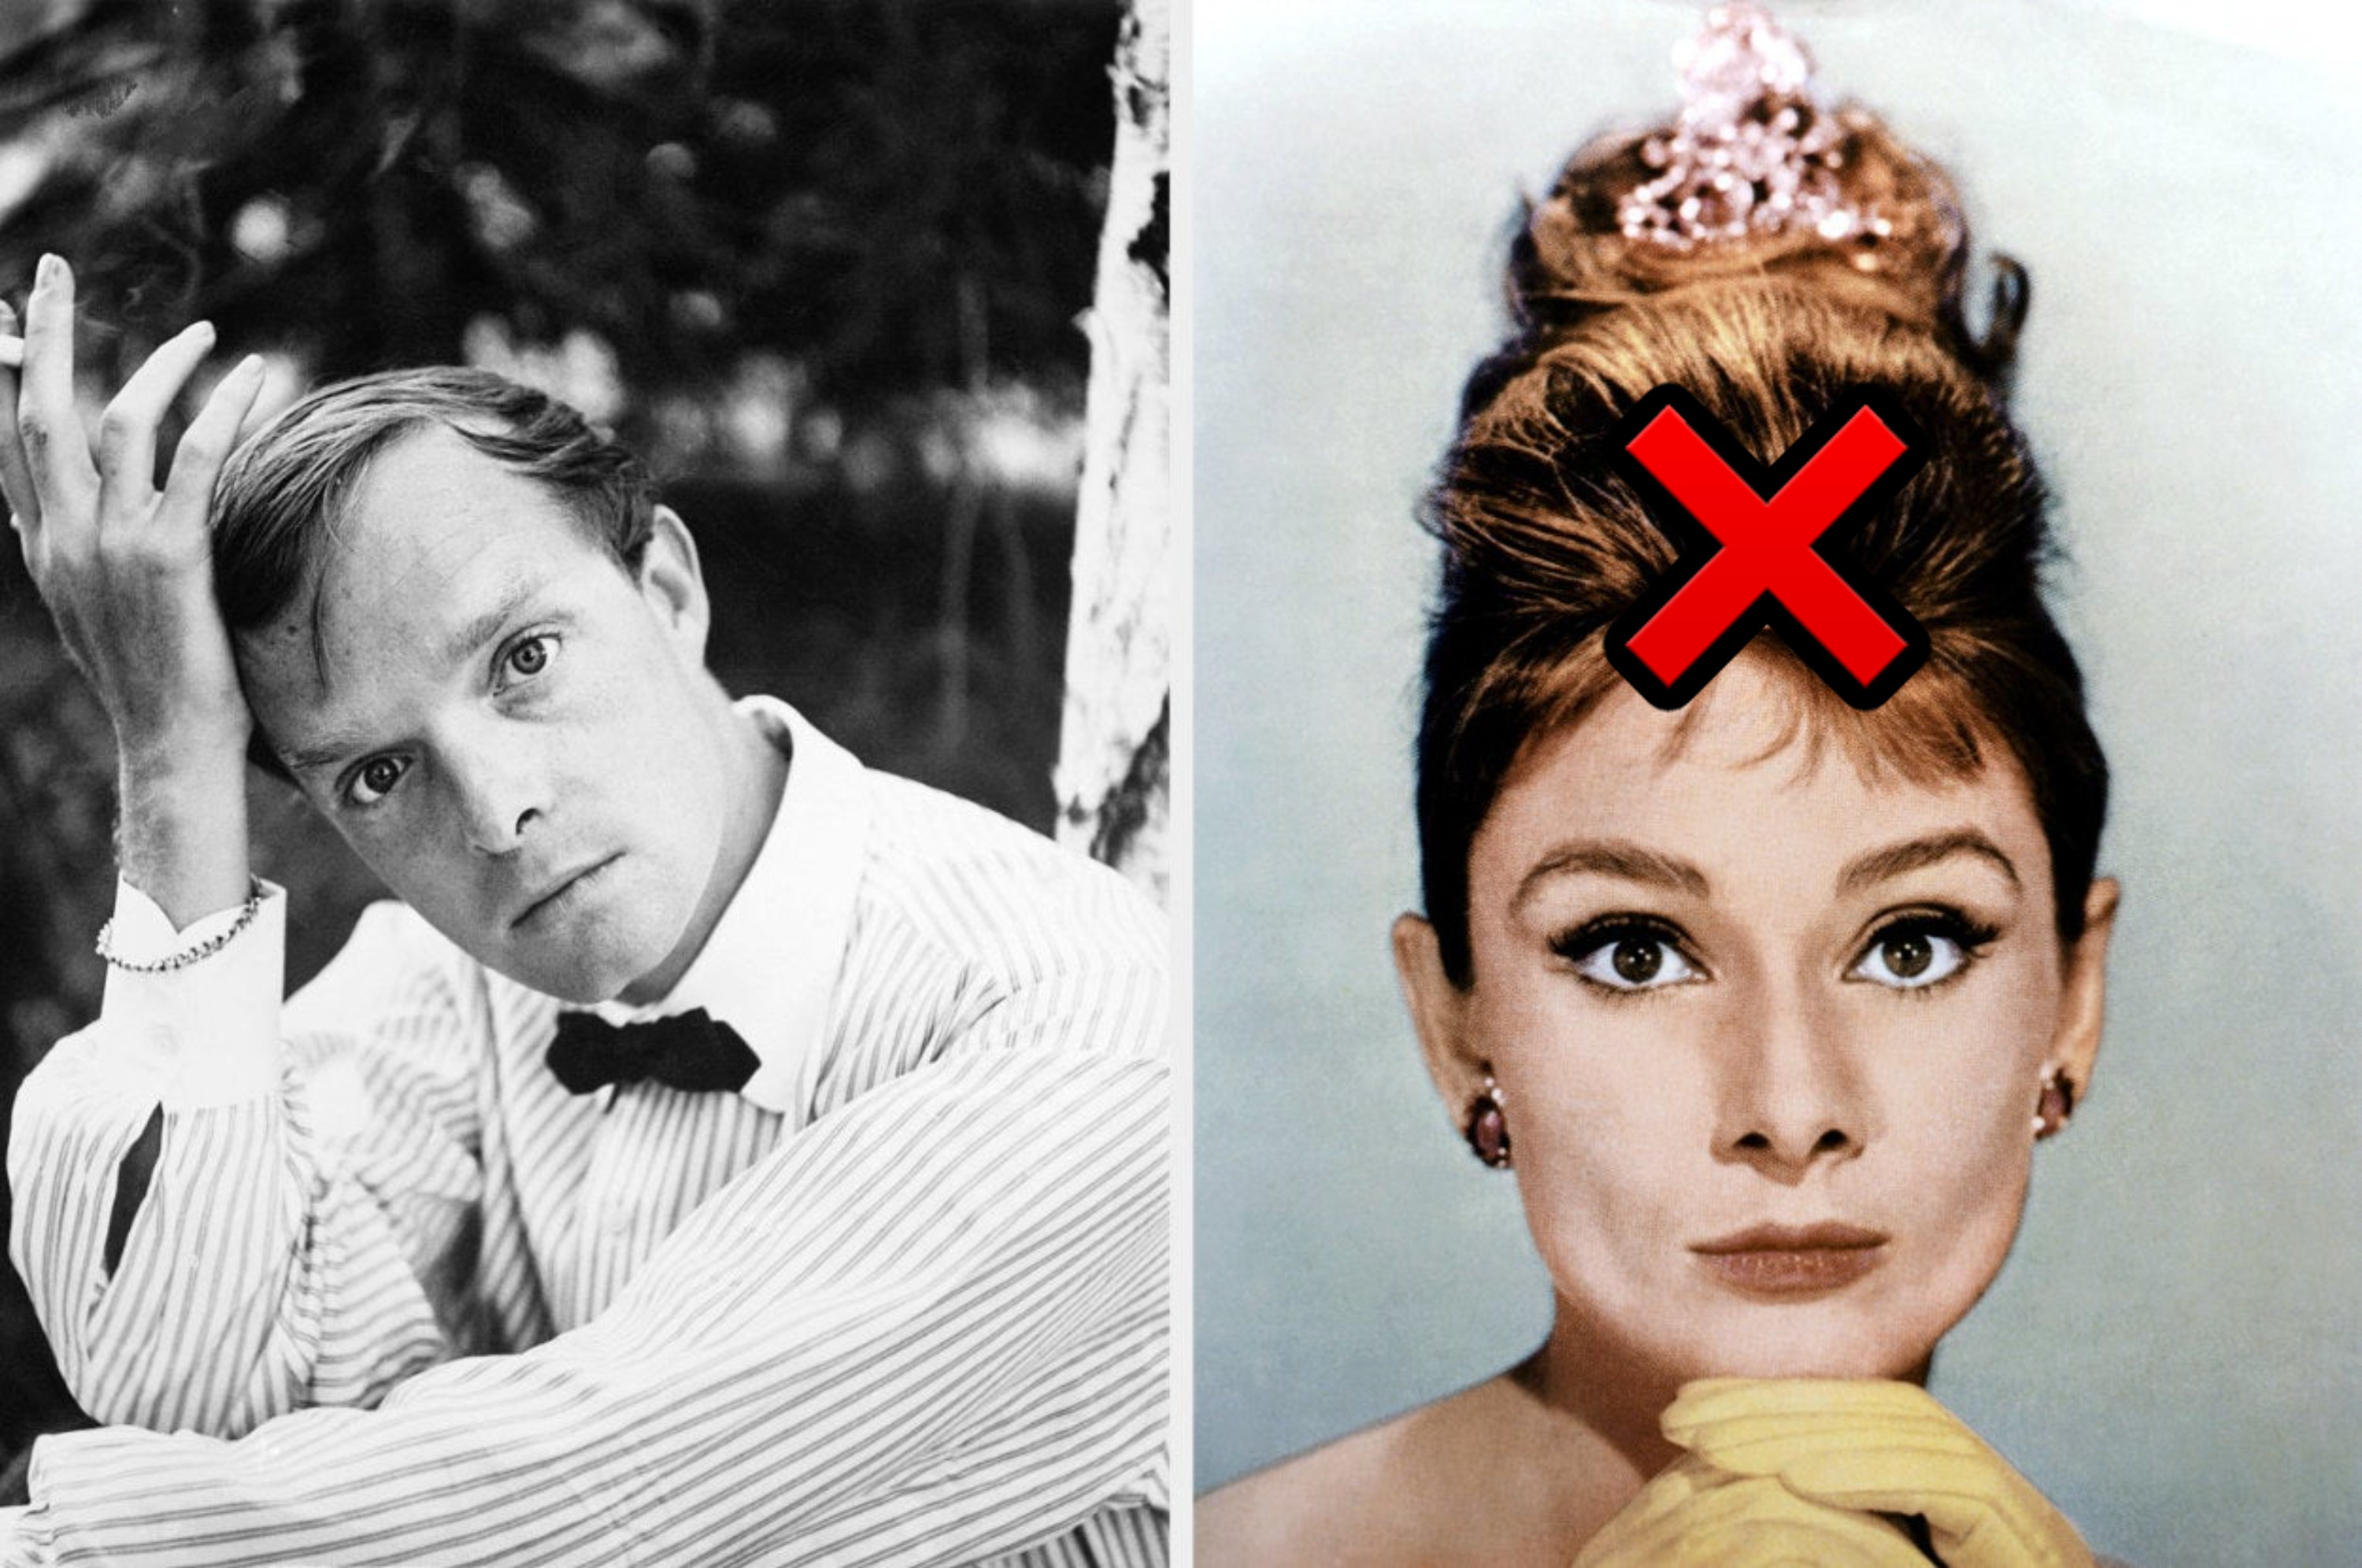 Truman Capote and Audrey Hepburn as Holly Golightly